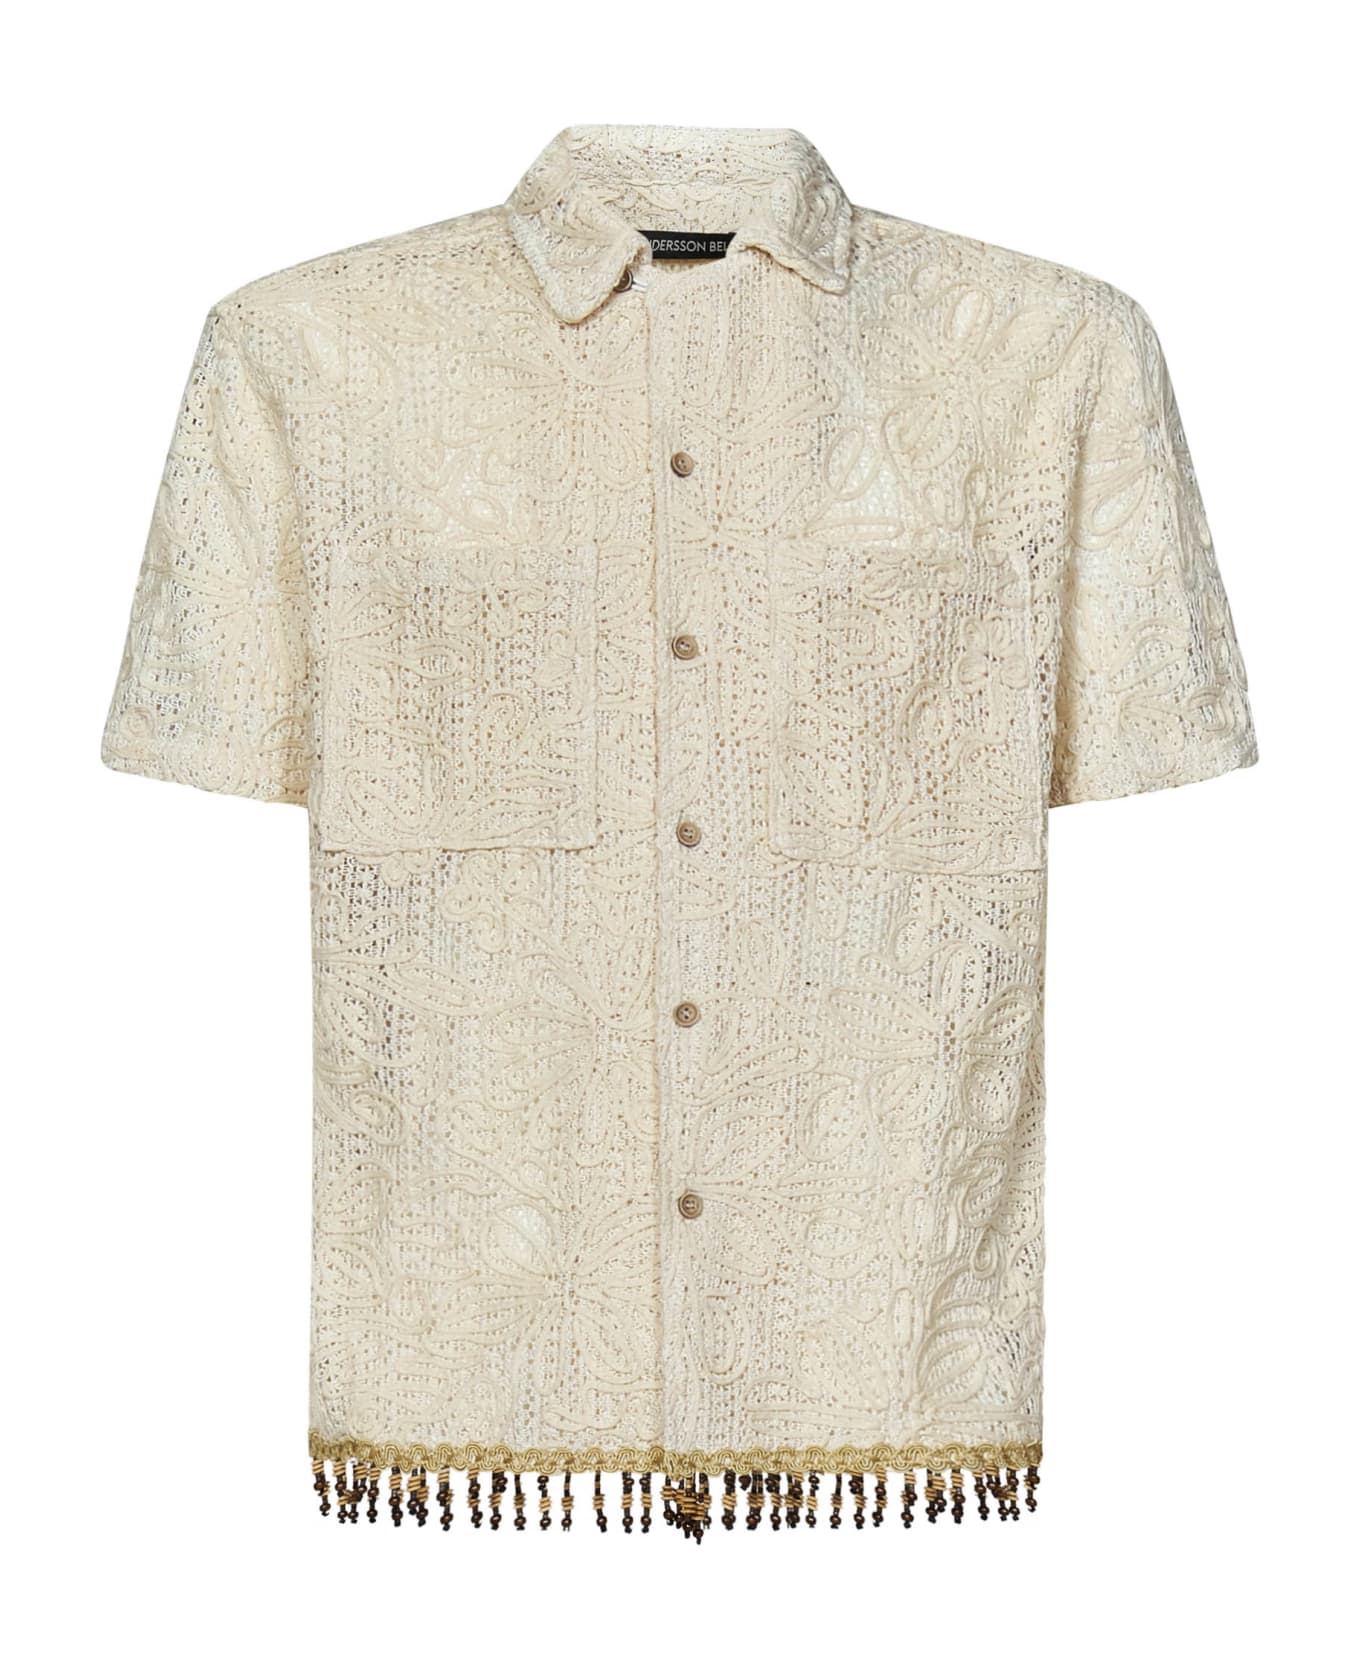 Andersson Bell Shirt - Bianco